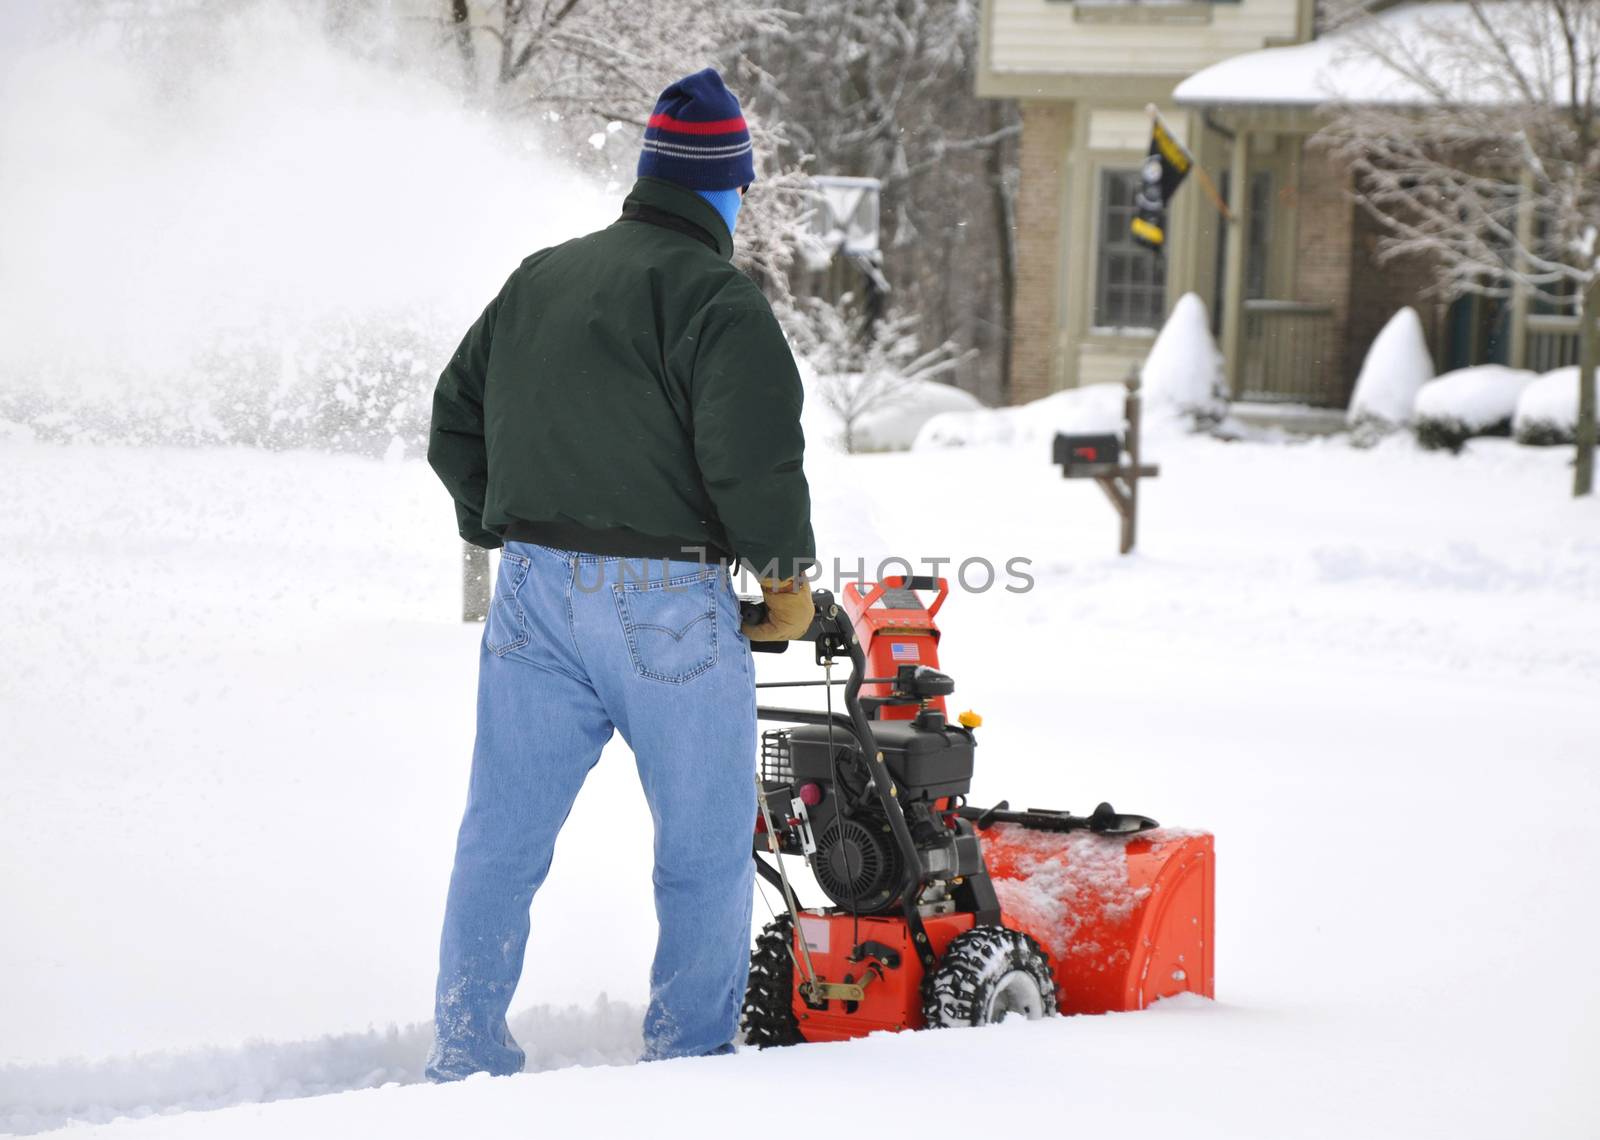 Man using snow blower after a heavy snowfall